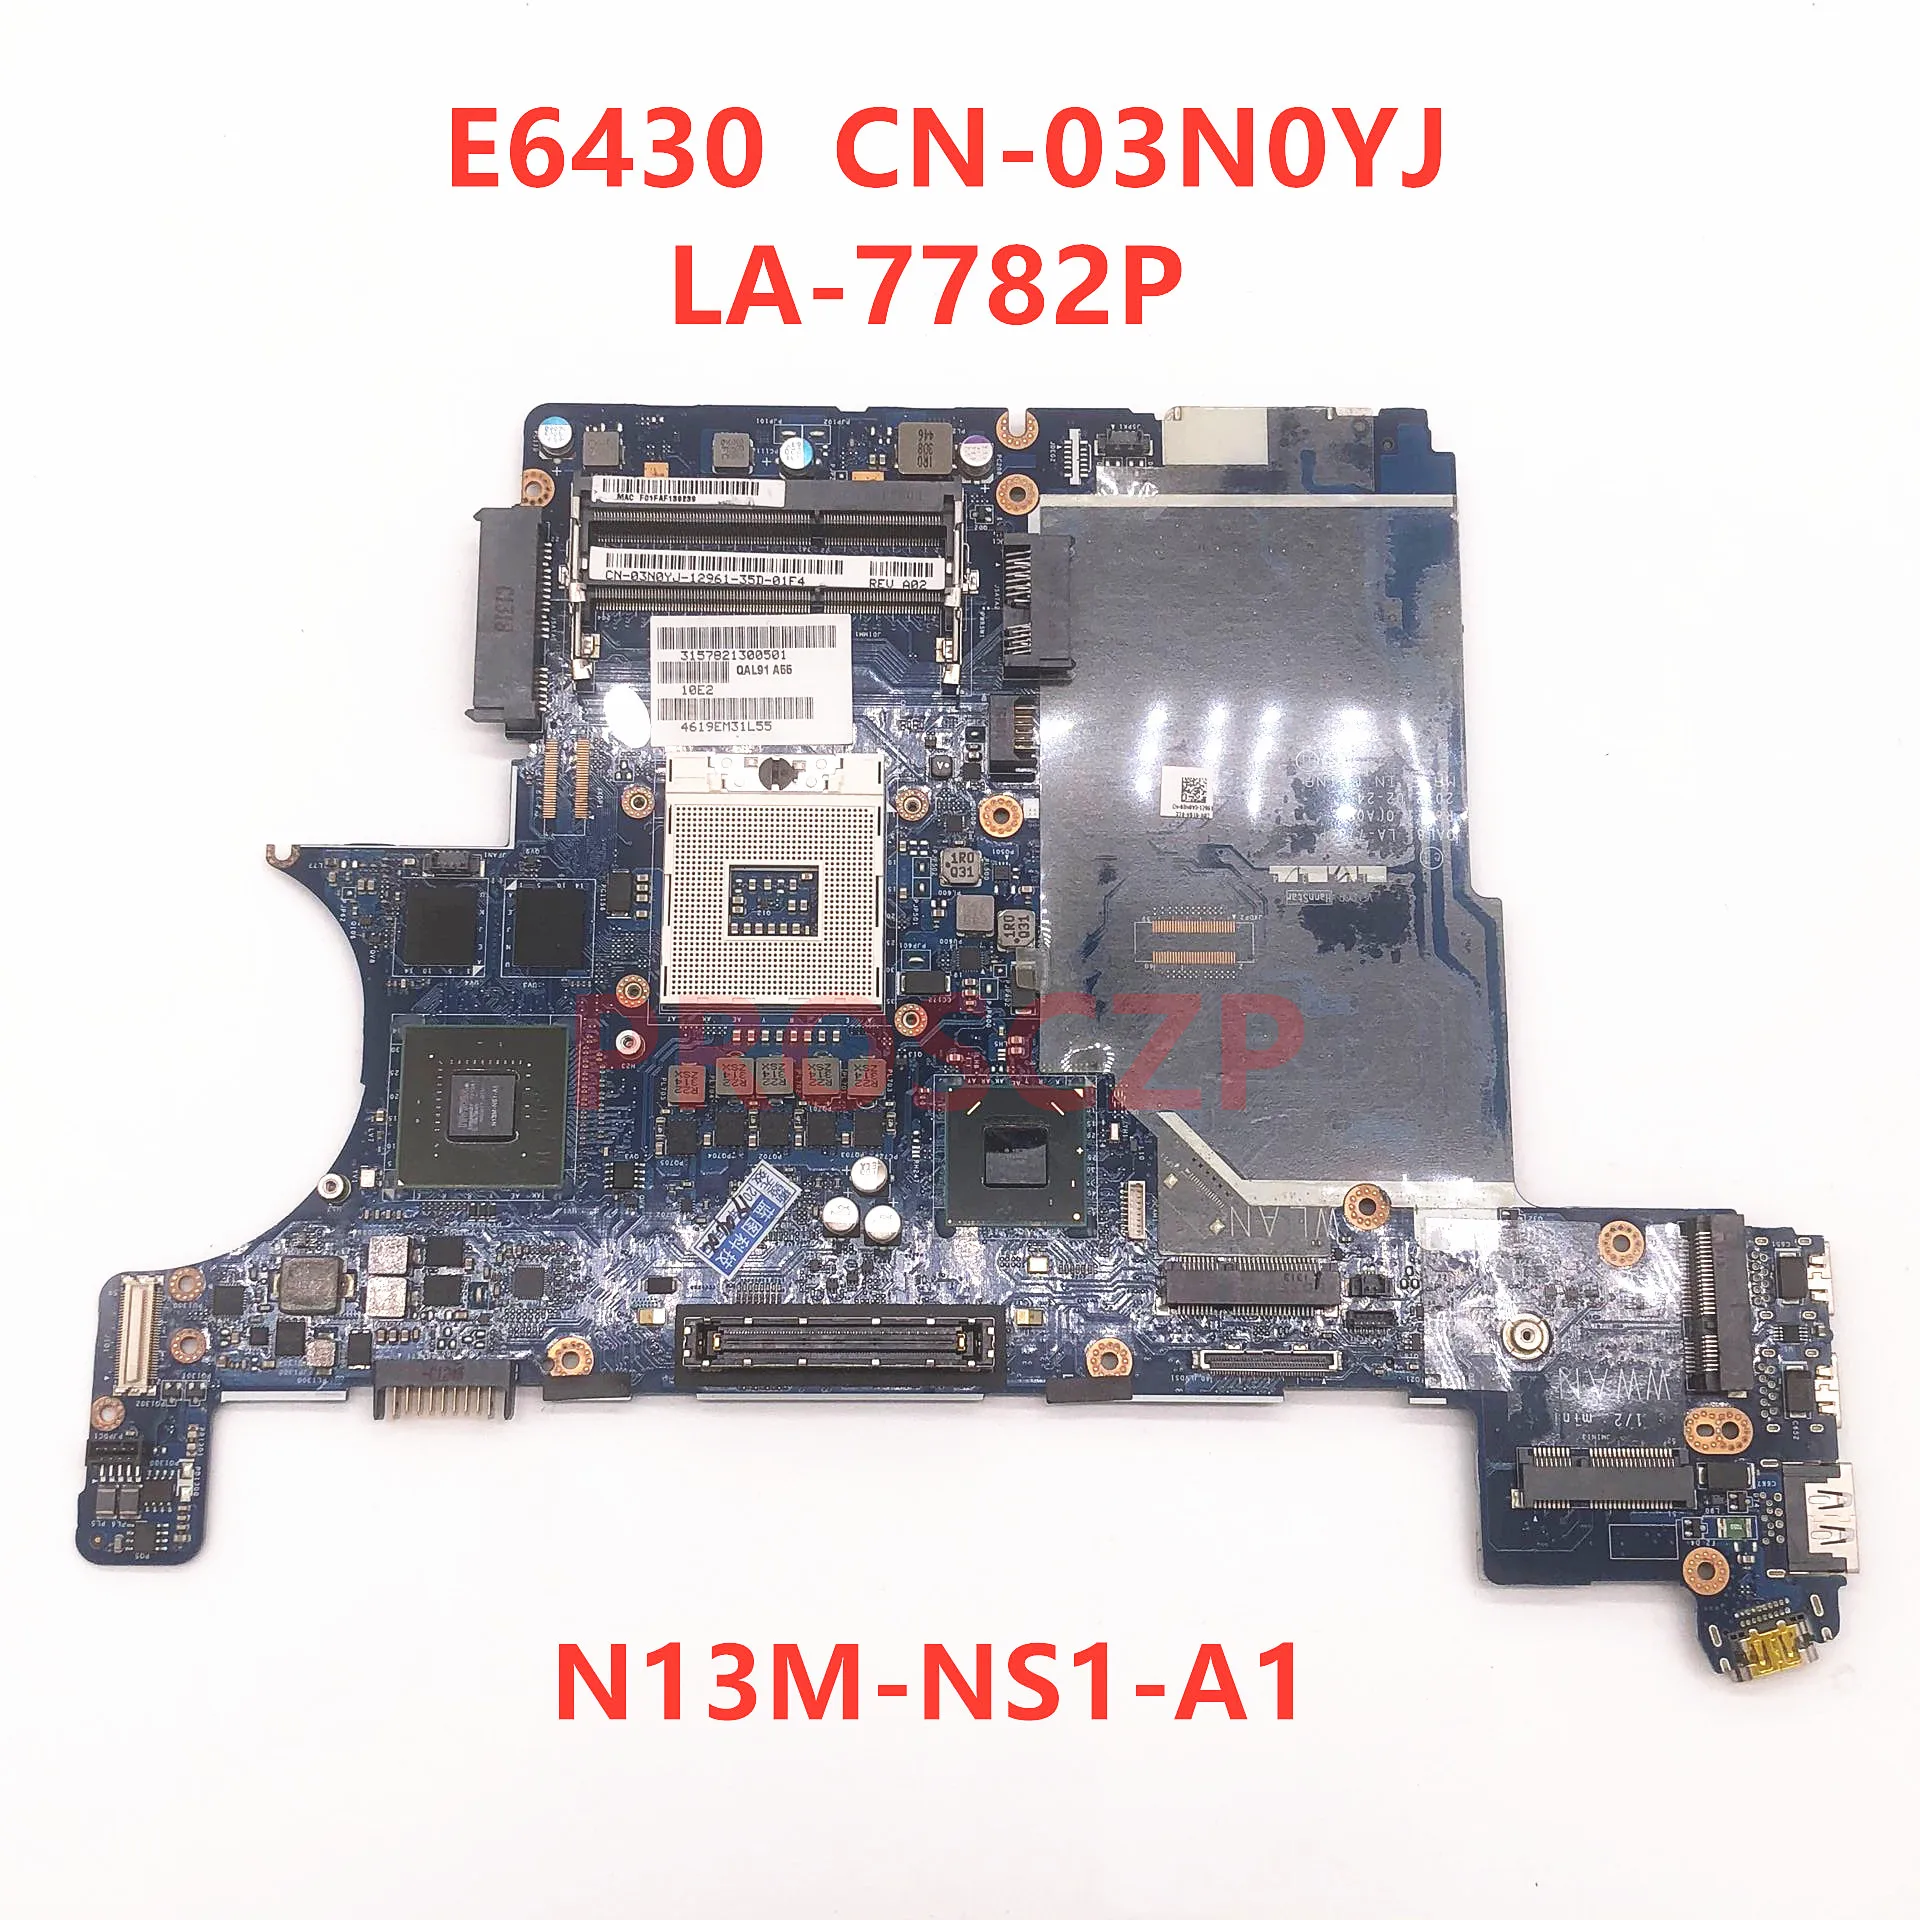 High Quality Mainboard For DELL E6430 Motherboard CN-03N0YJ 03N0YJ 3N0YJ LA-7782P With N13M-NS1-A1 GPU QM77 100% Full Tested OK